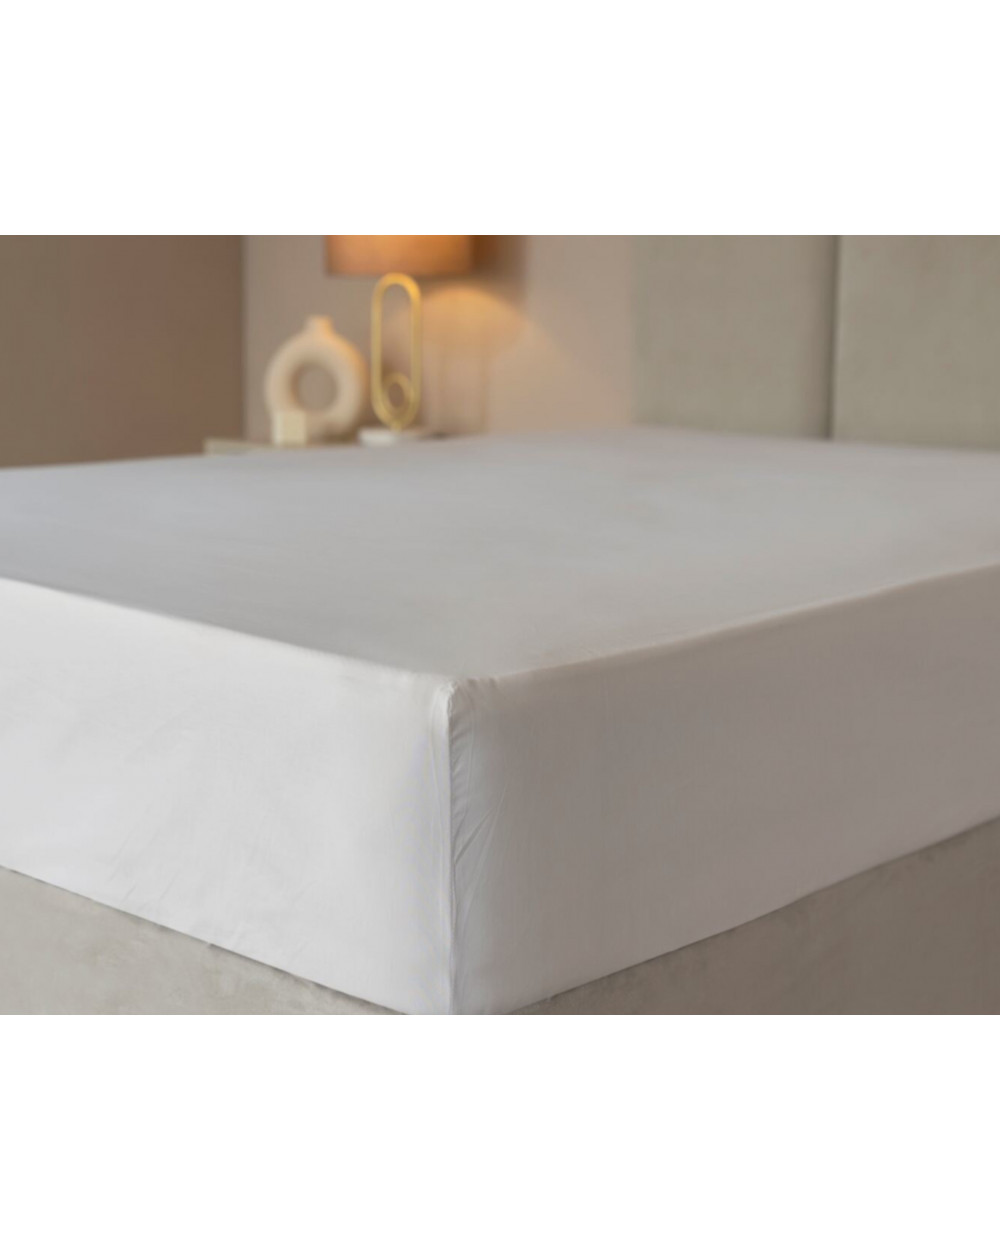 200TC Egyptian Cotton Fitted Sheet